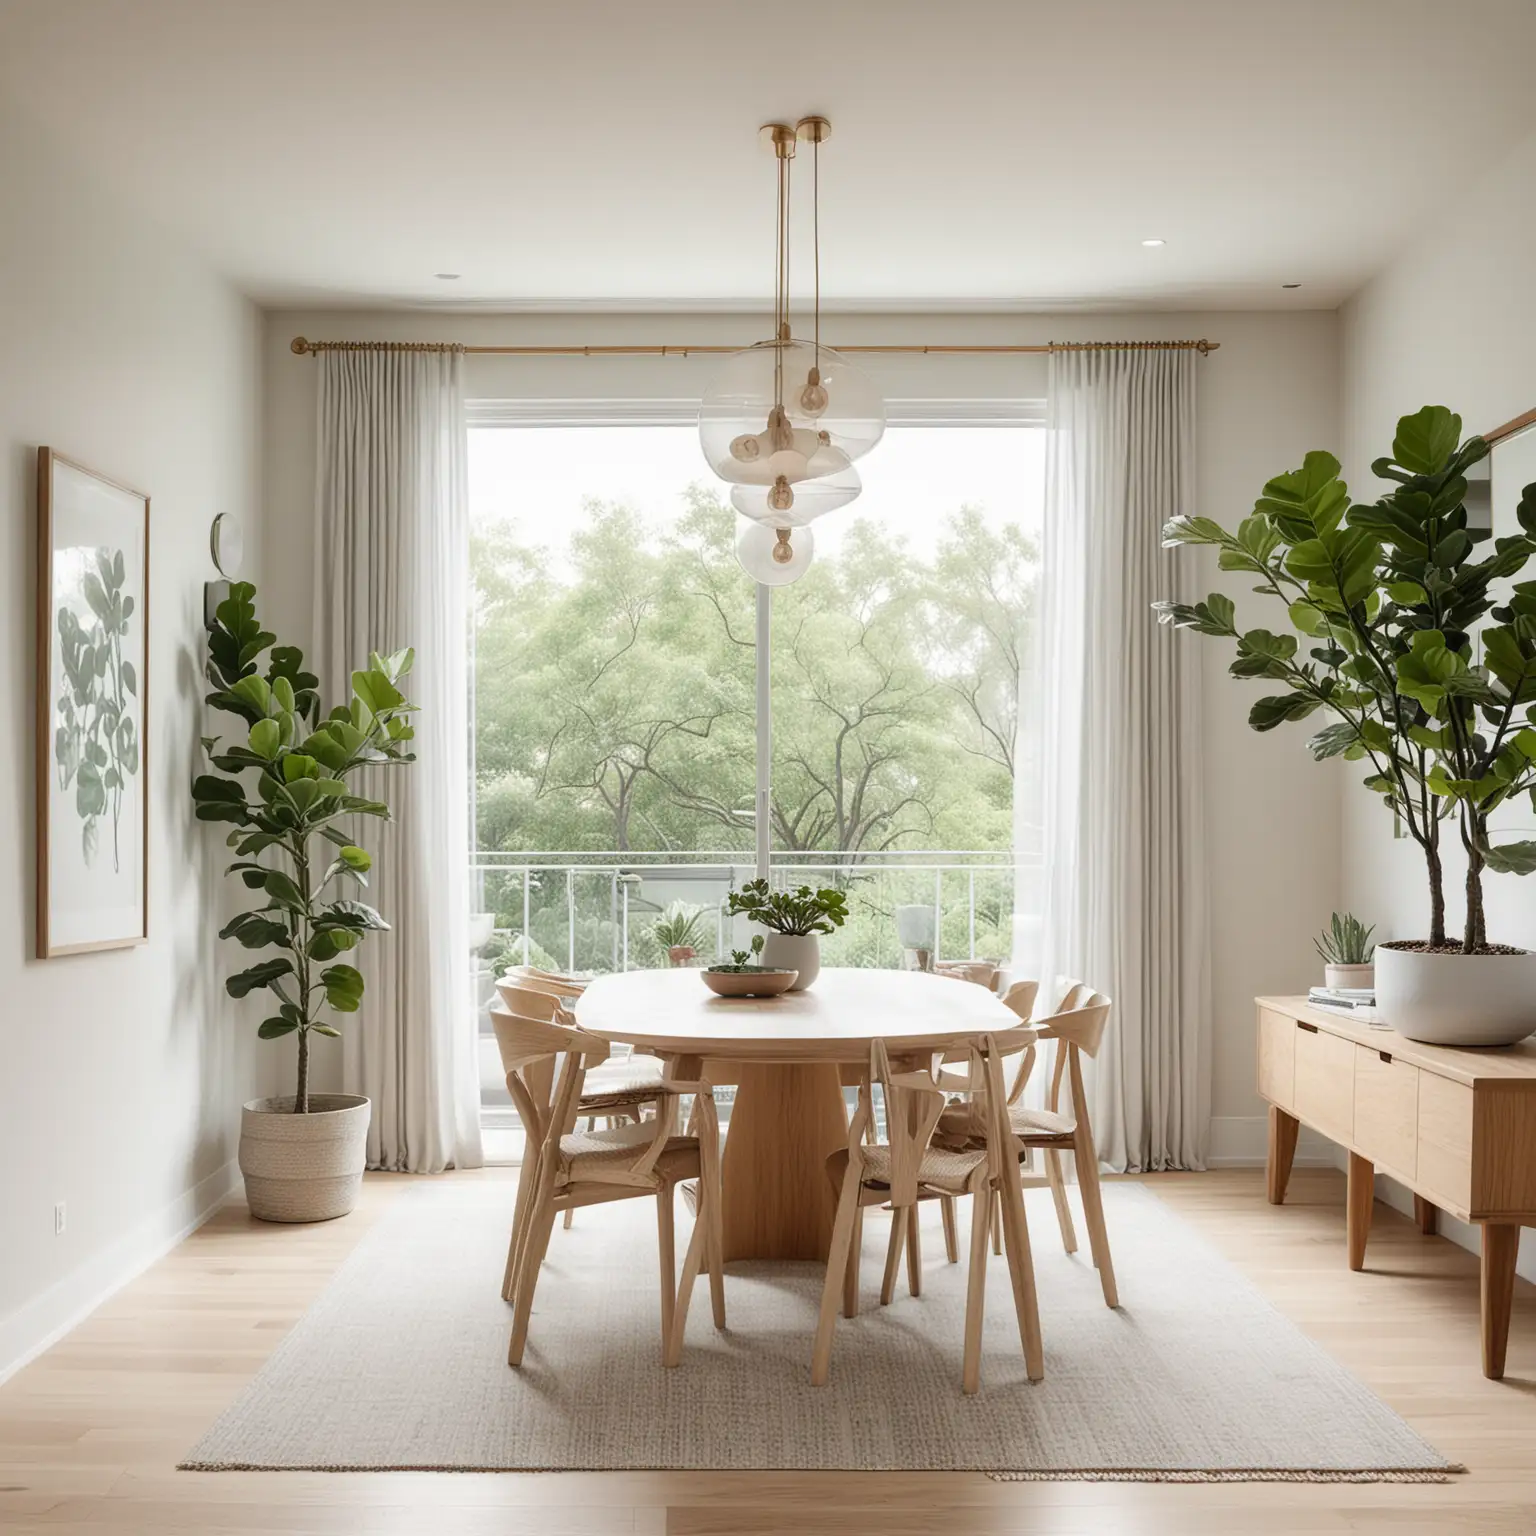 Minimalist-Dining-Room-with-Scandinavian-Design-and-Neutral-Palette